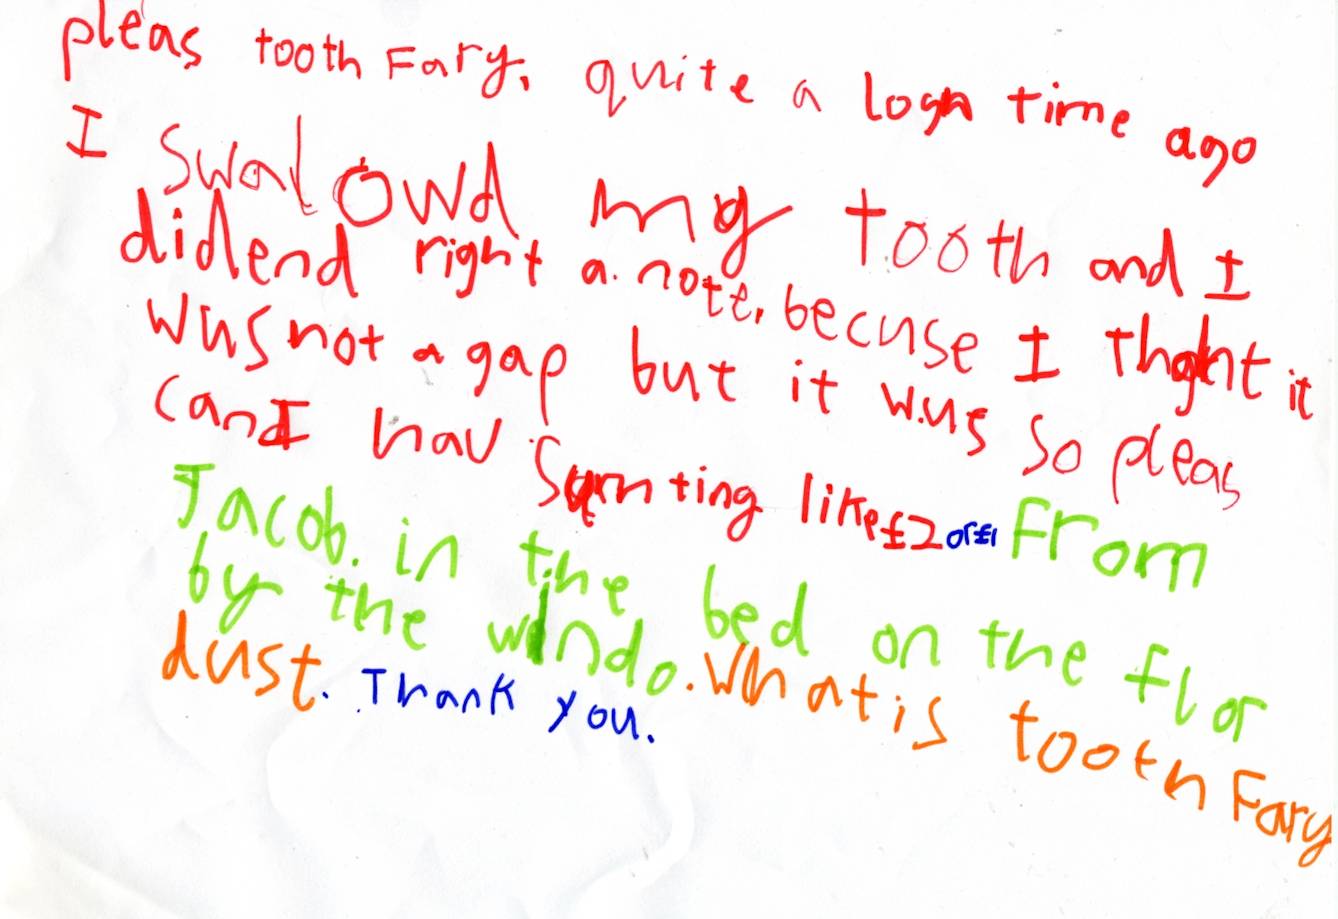 Letter on white paper in various colours of ink felt-tip. Reads: Please Tooth Fairy, quite a long time ago I swallowed my tooth and I didn't write a note, because I thought it was not a gap but it was, so please can I have something like £2 or £1? From Jacob, in the bed on the floor by the window. What is Tooth Fairy dust? Thank you.